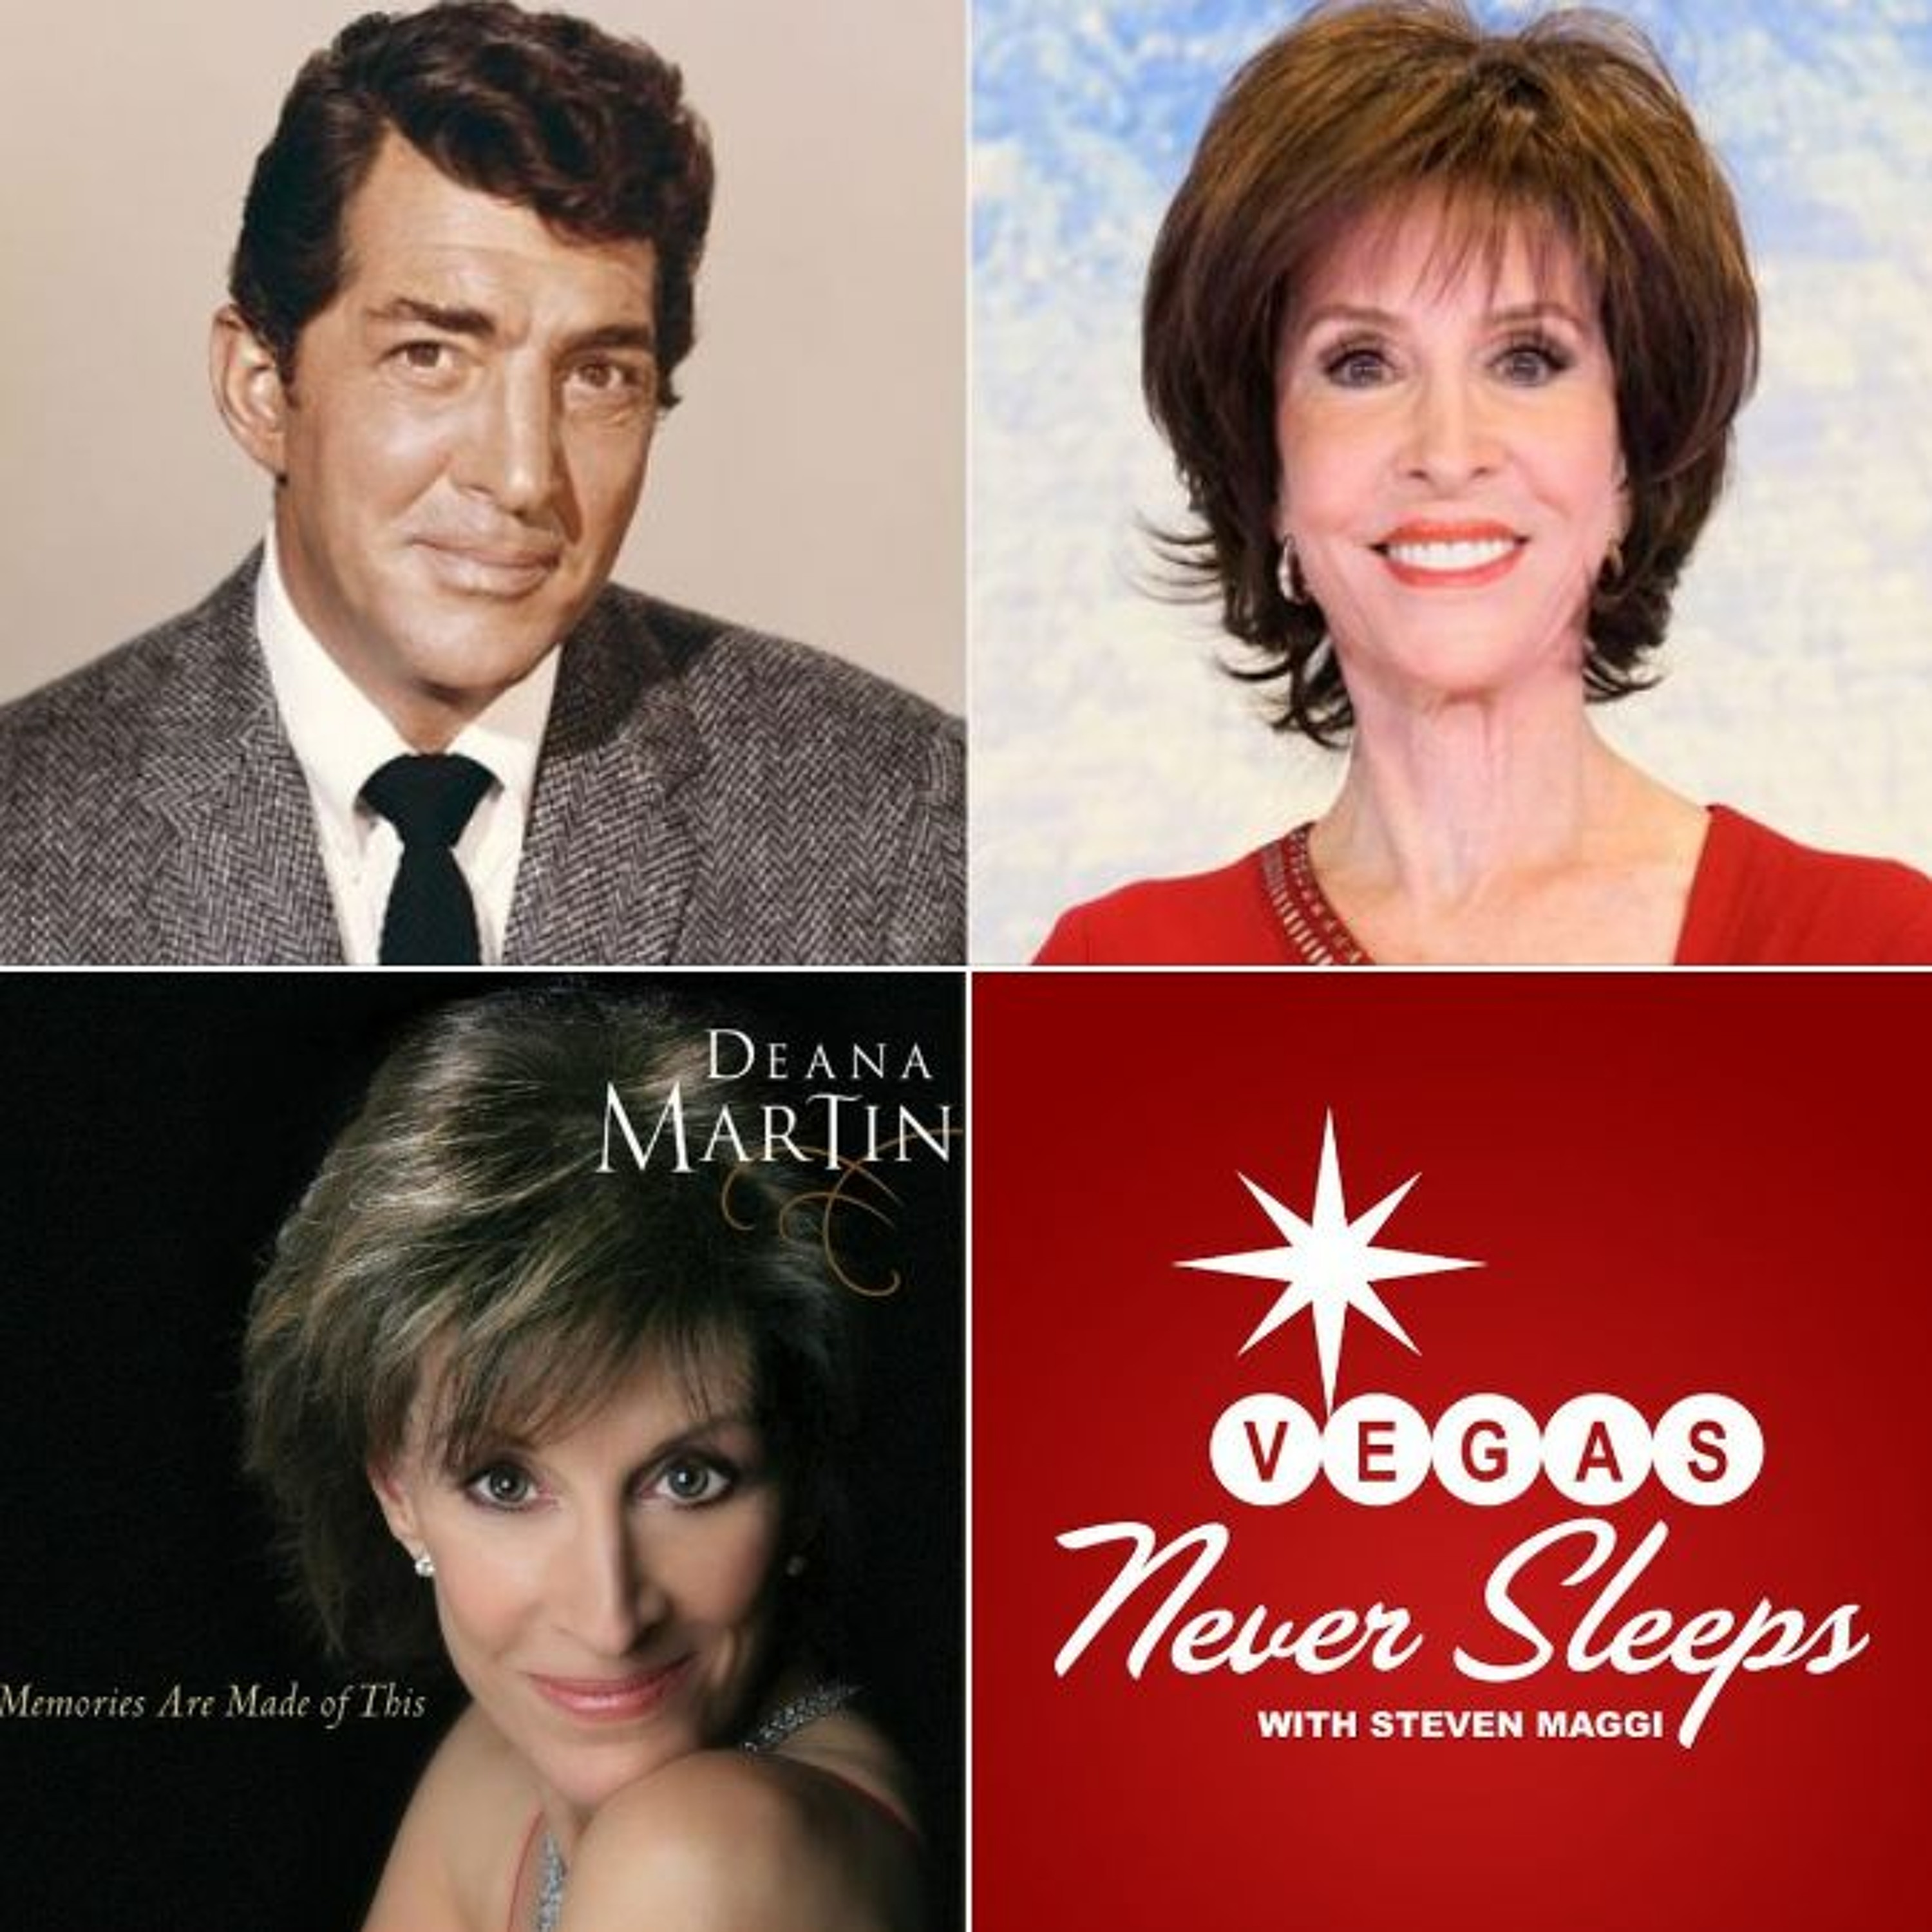 ”Memories Are Made Of This” - The Complete Deana Martin Interview